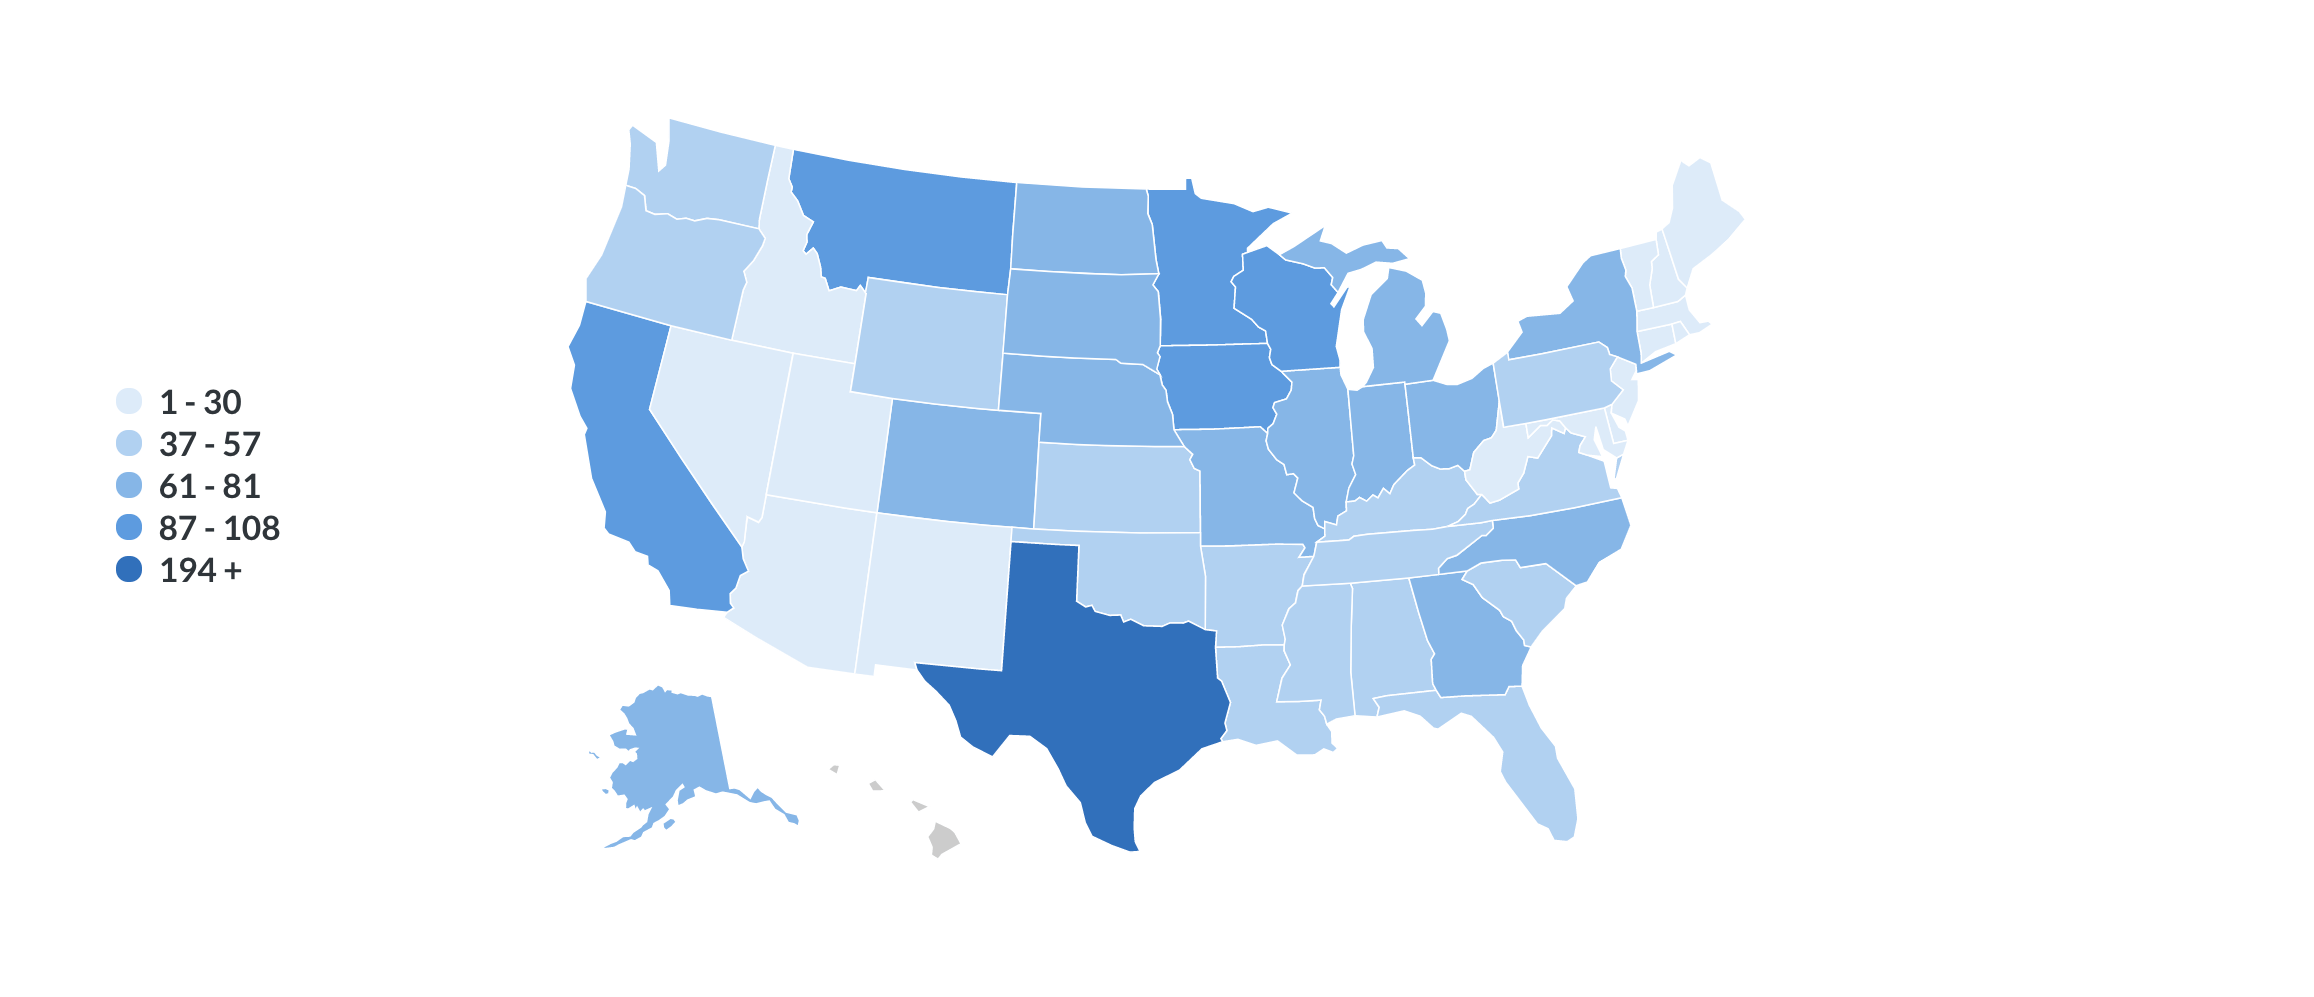 An example of a regional USA map with data from the People table.